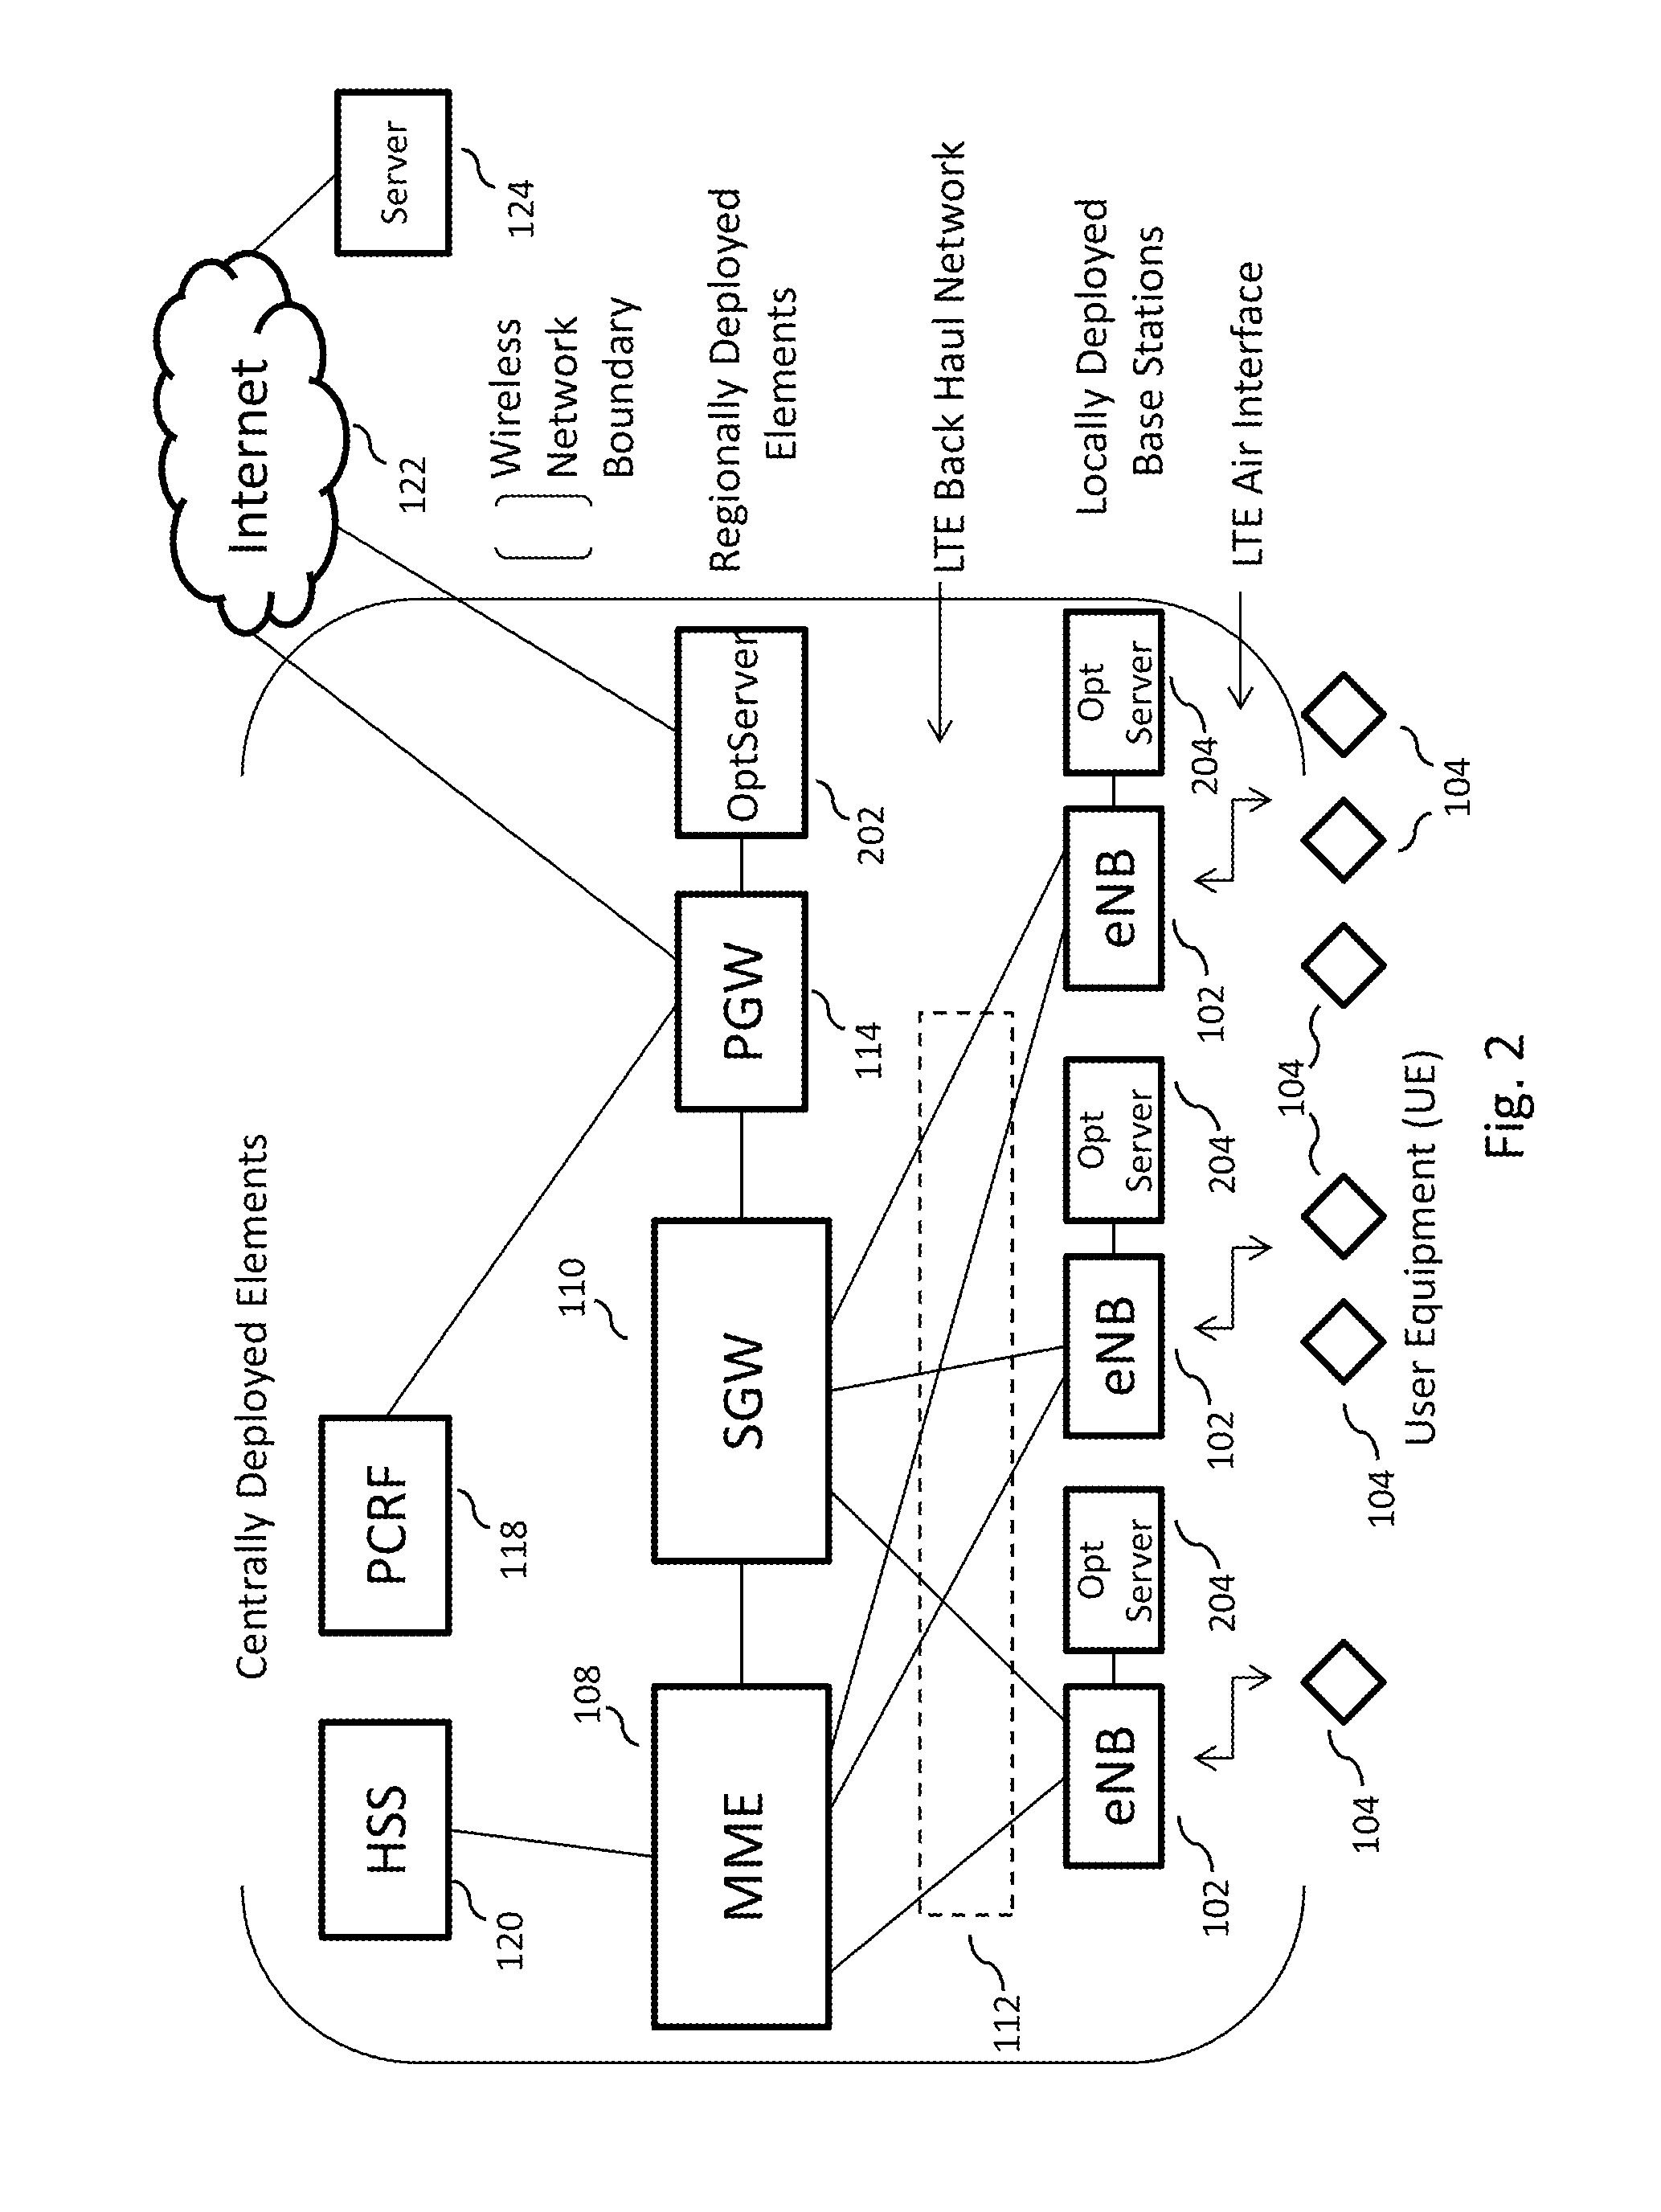 Baseband data transmission and reception in an LTE wireless base station employing periodically scanning RF beam forming techniques